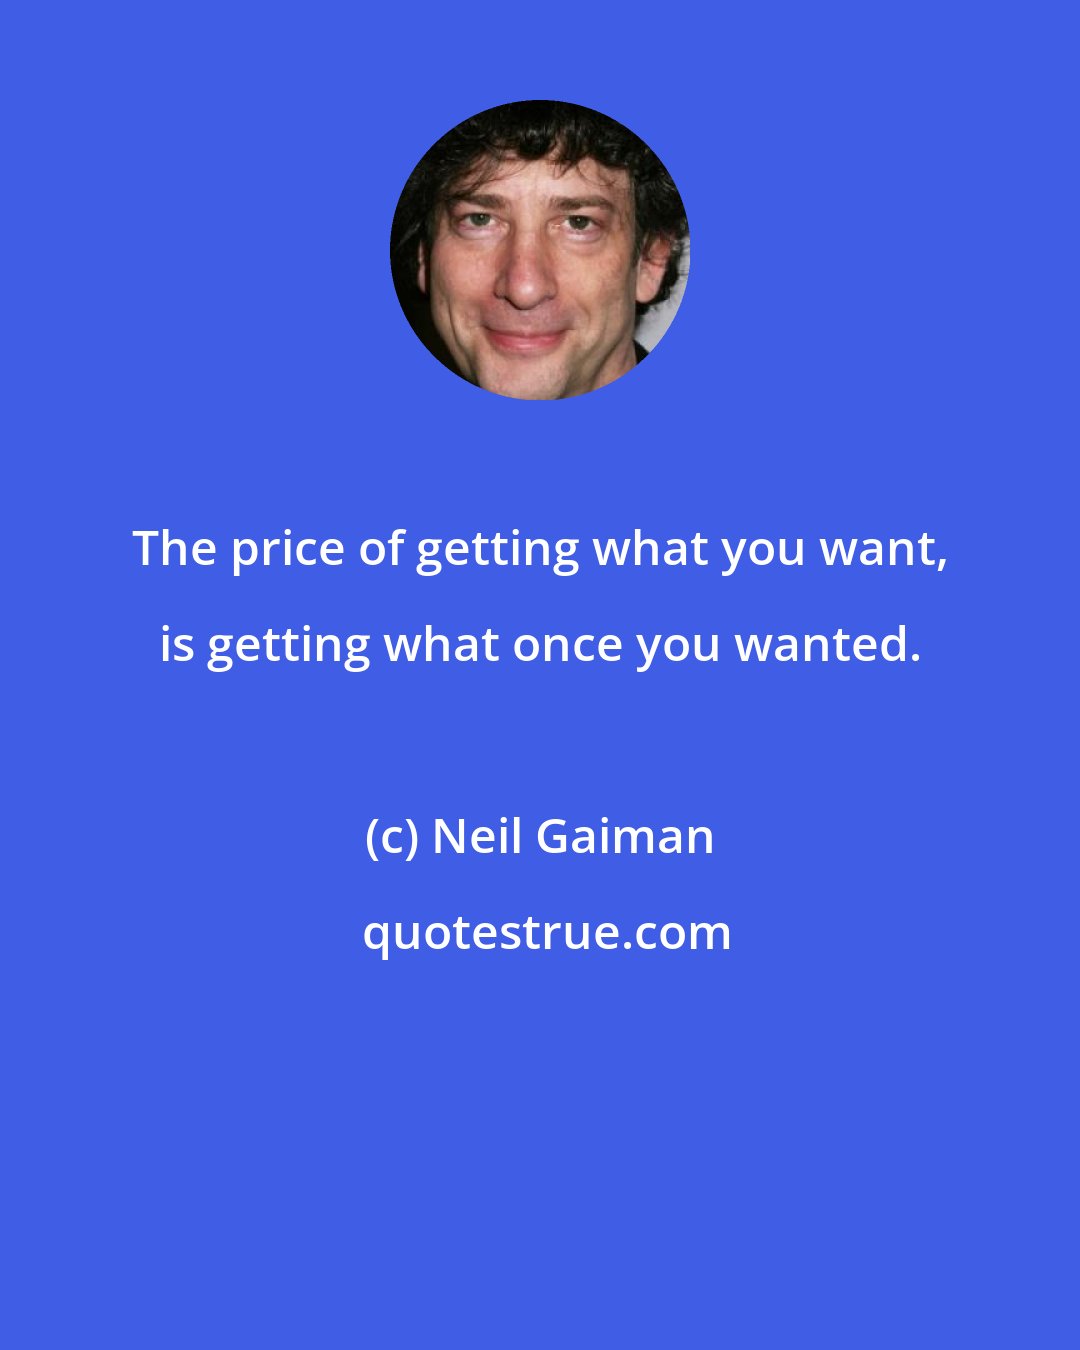 Neil Gaiman: The price of getting what you want, is getting what once you wanted.